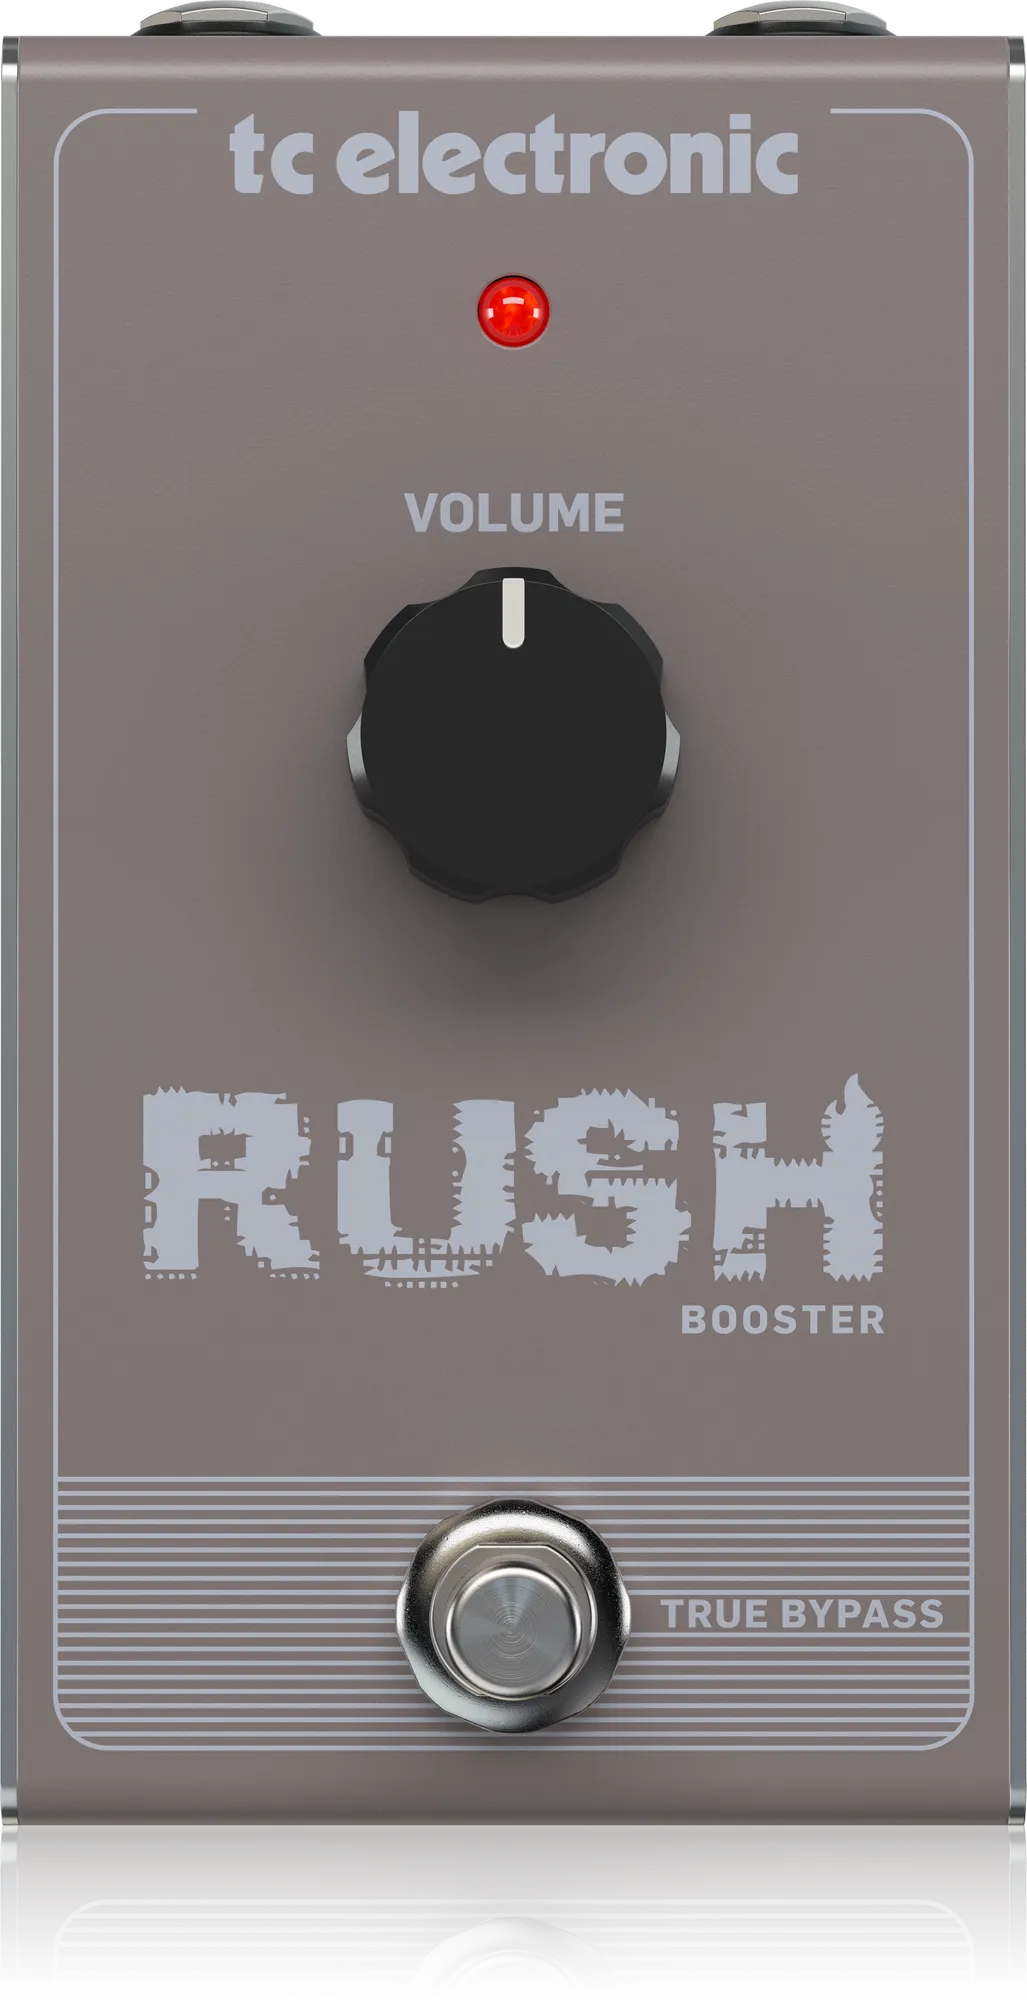 Rush Booster Guitar Pedal By TC Electronic